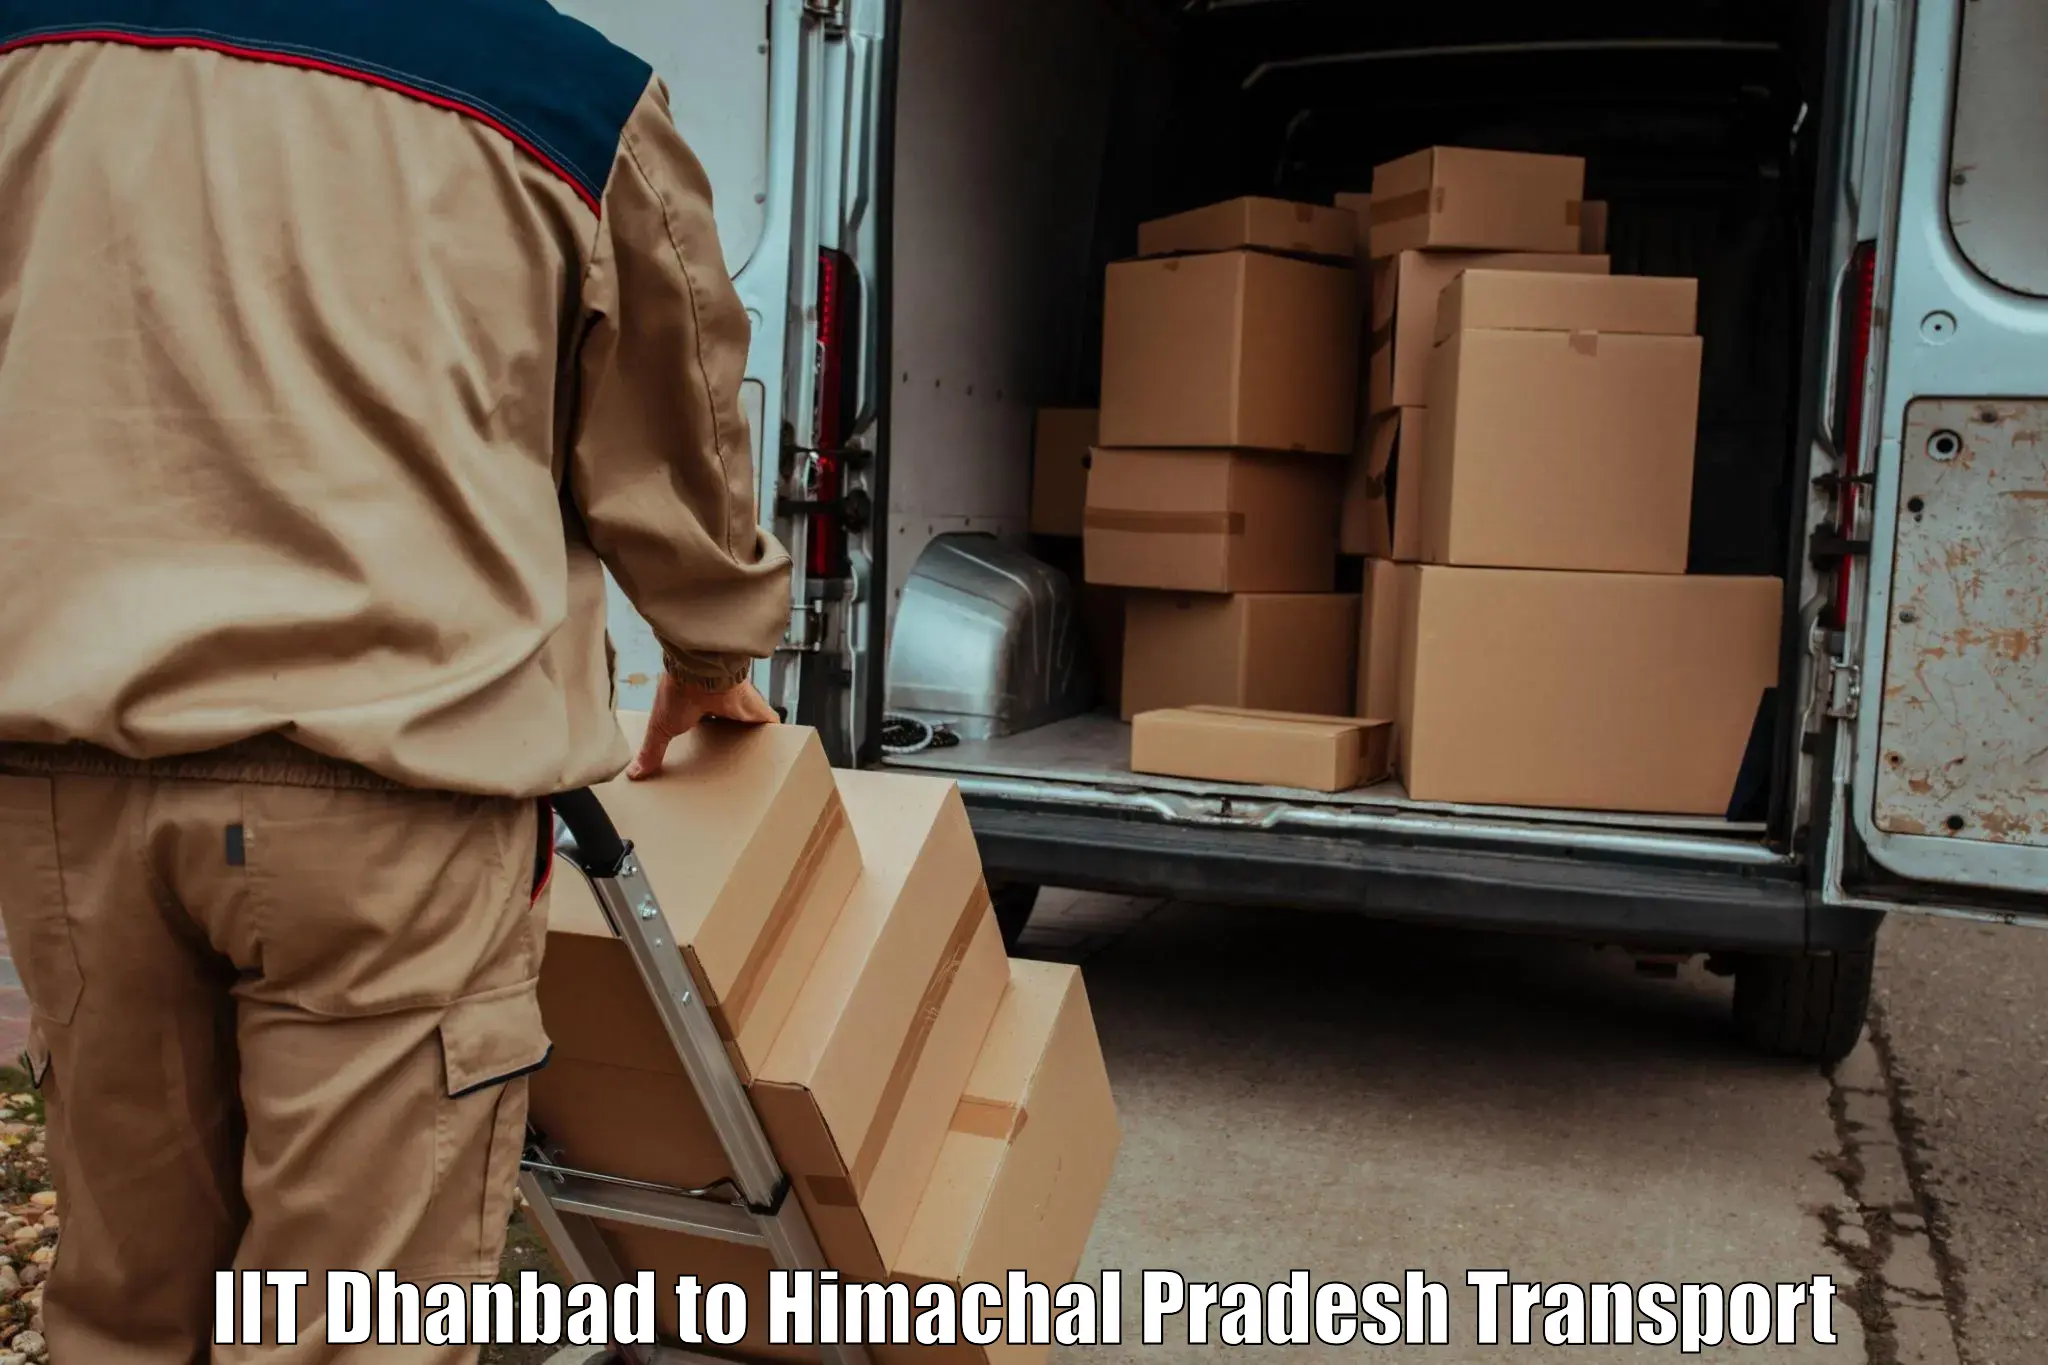 Nearby transport service IIT Dhanbad to Baijnath